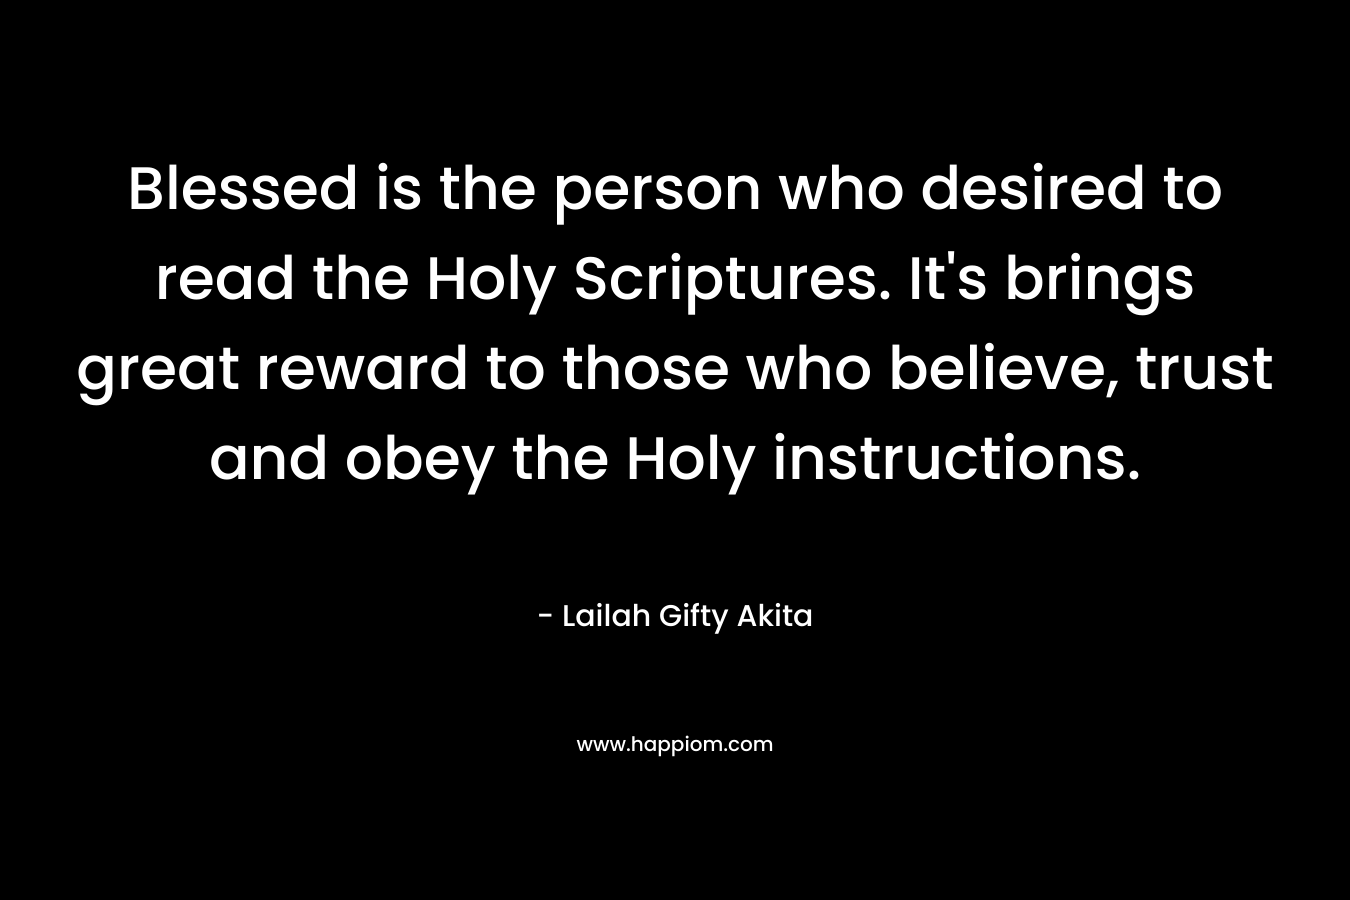 Blessed is the person who desired to read the Holy Scriptures. It's brings great reward to those who believe, trust and obey the Holy instructions.